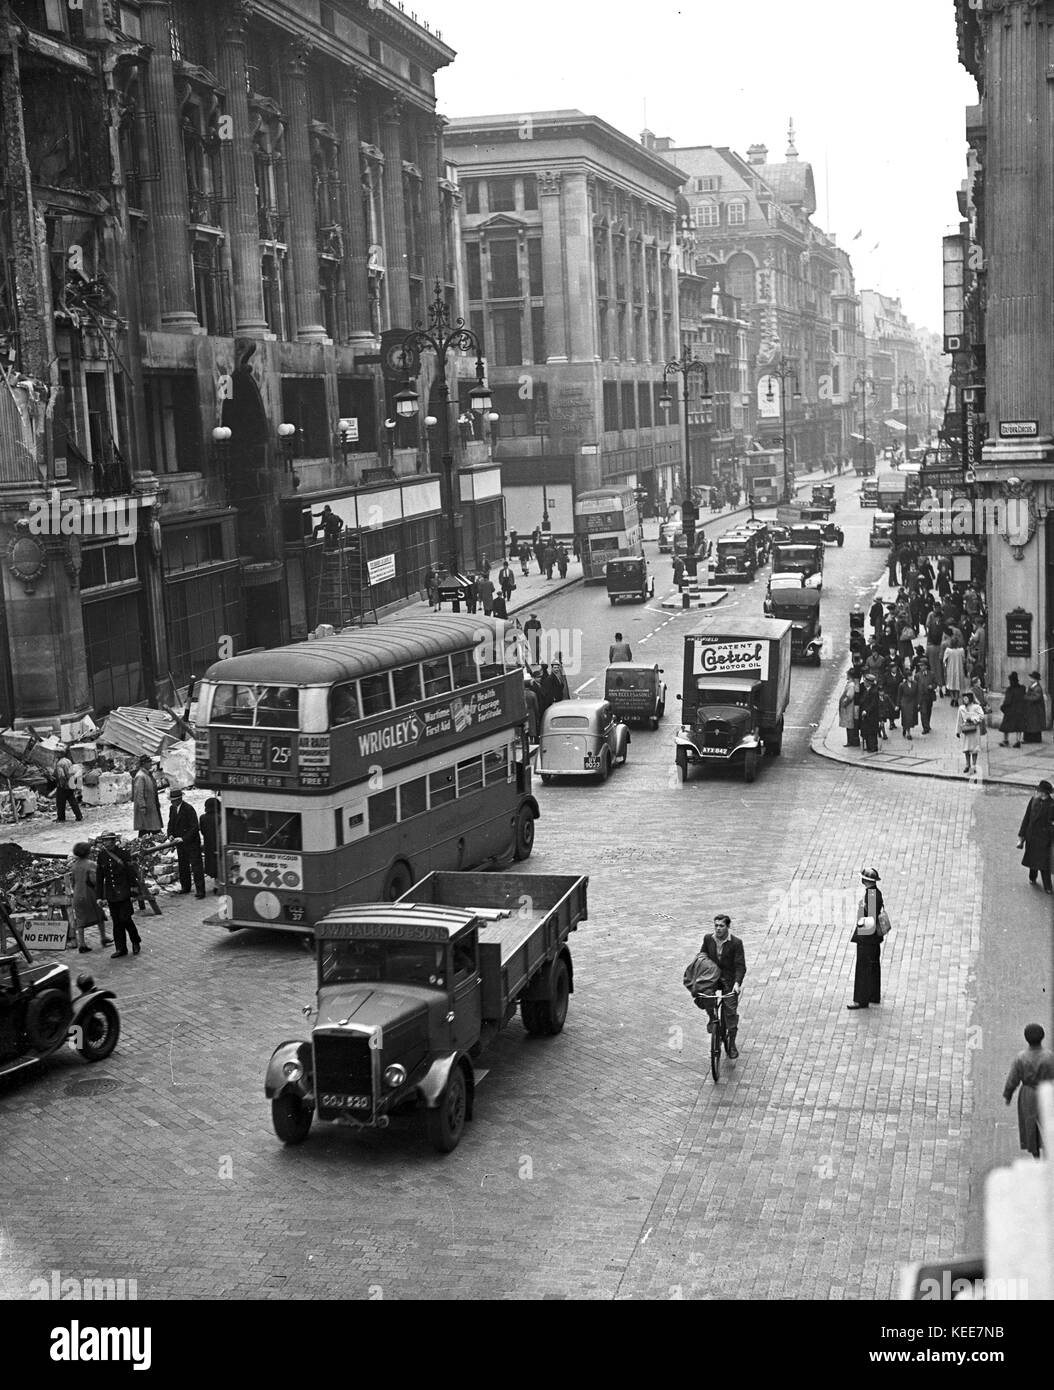 Oxford Circus, London c1942. Life going on as normal despite the effects of a bombing during World War 2, people going about their daily business as going to school or work, with buses and taxi cabs on the road alongside lorries and vans.  Photograph by Tony Henshaw -  From the wholly-owned original negative. Stock Photo